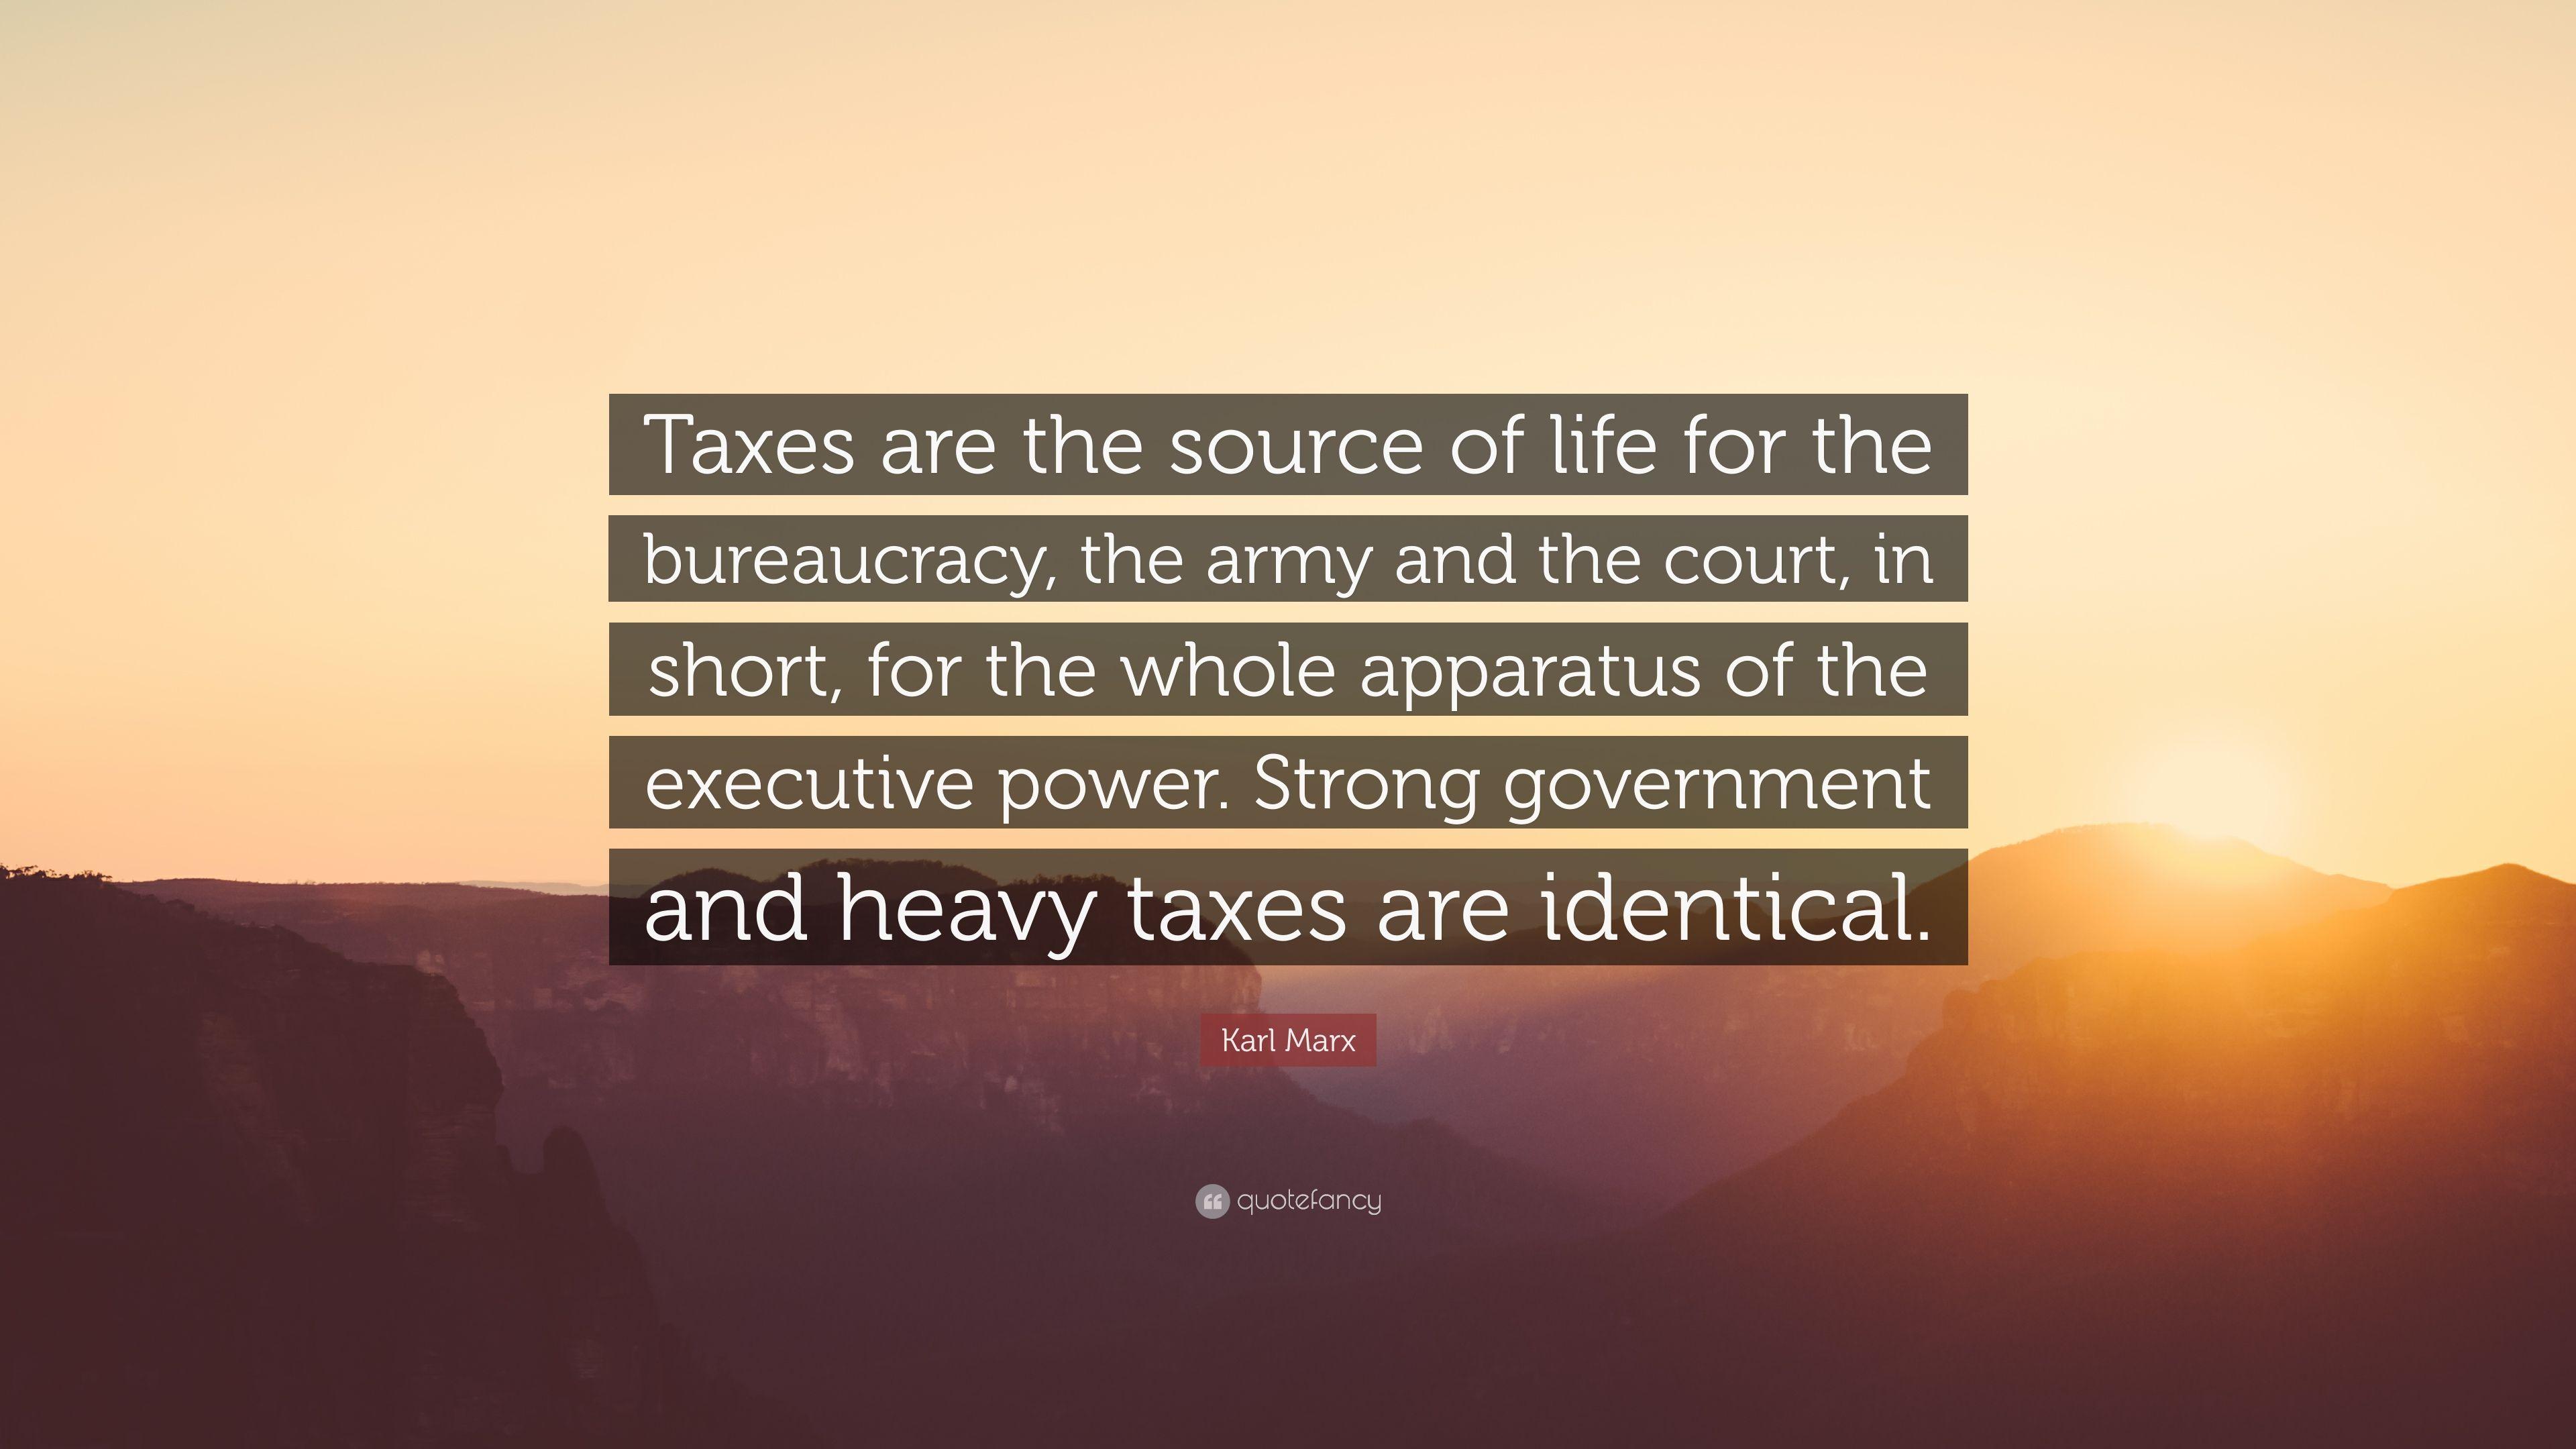 Karl Marx Quote: “Taxes are the source of life for the bureaucracy